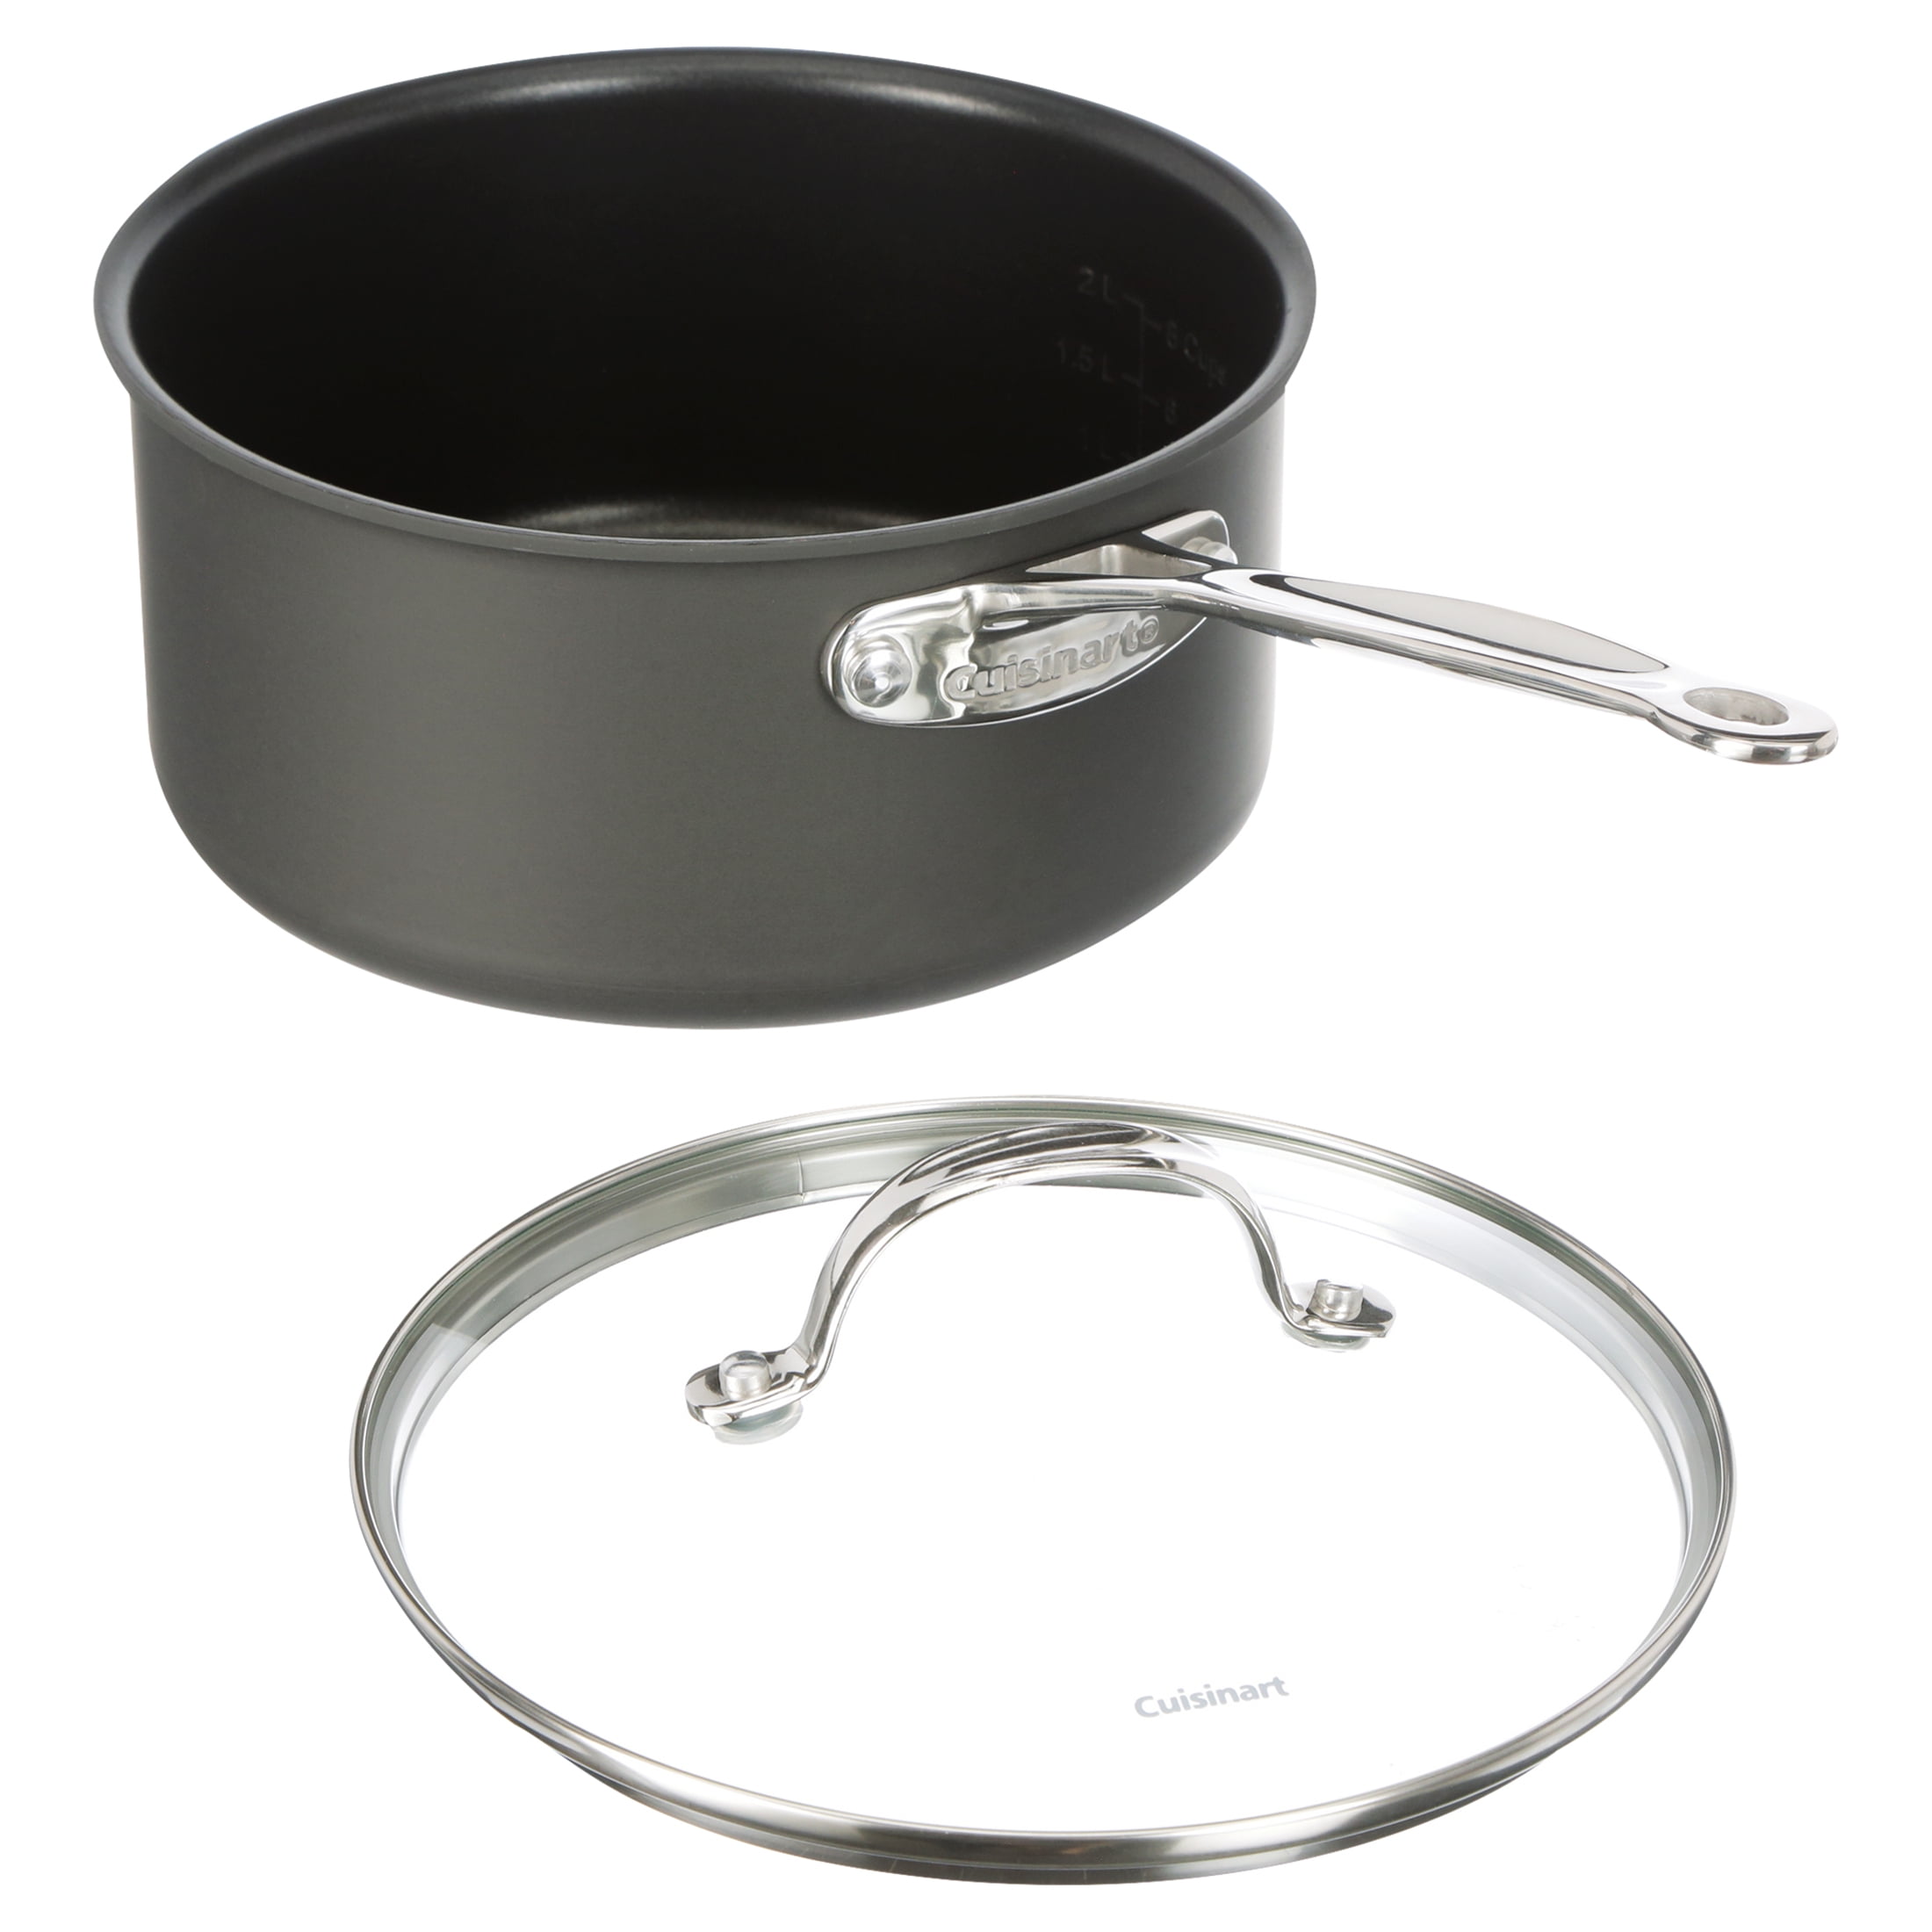 Cuisinart 635-24 Chef's Classic Nonstick Hard-Anodized 3-Quart Pan with Cover